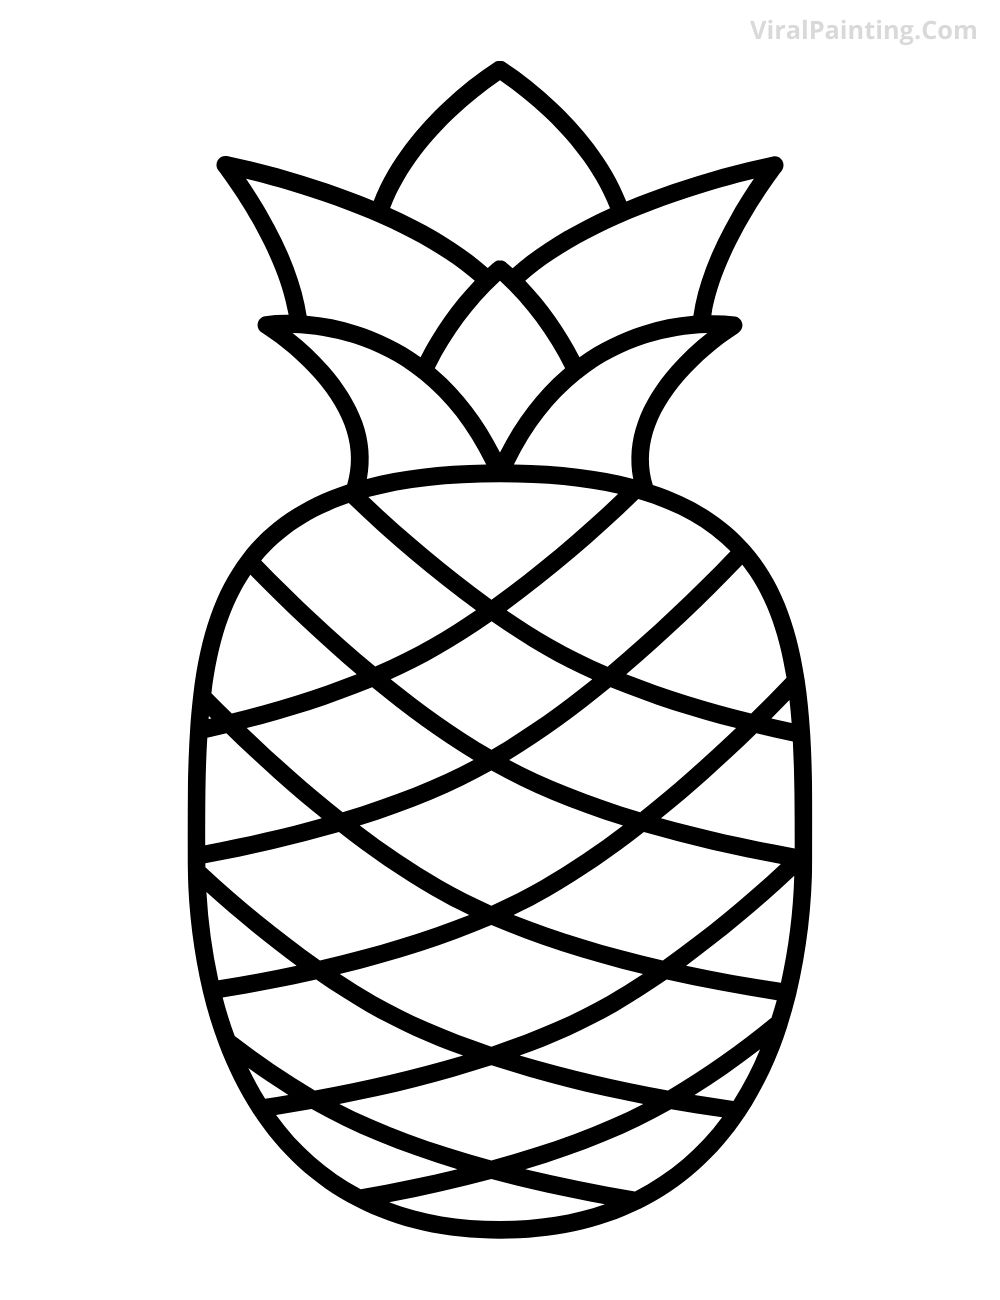 Simple and Easy pineapple drawing ideas for adults by viral painting.com (1)